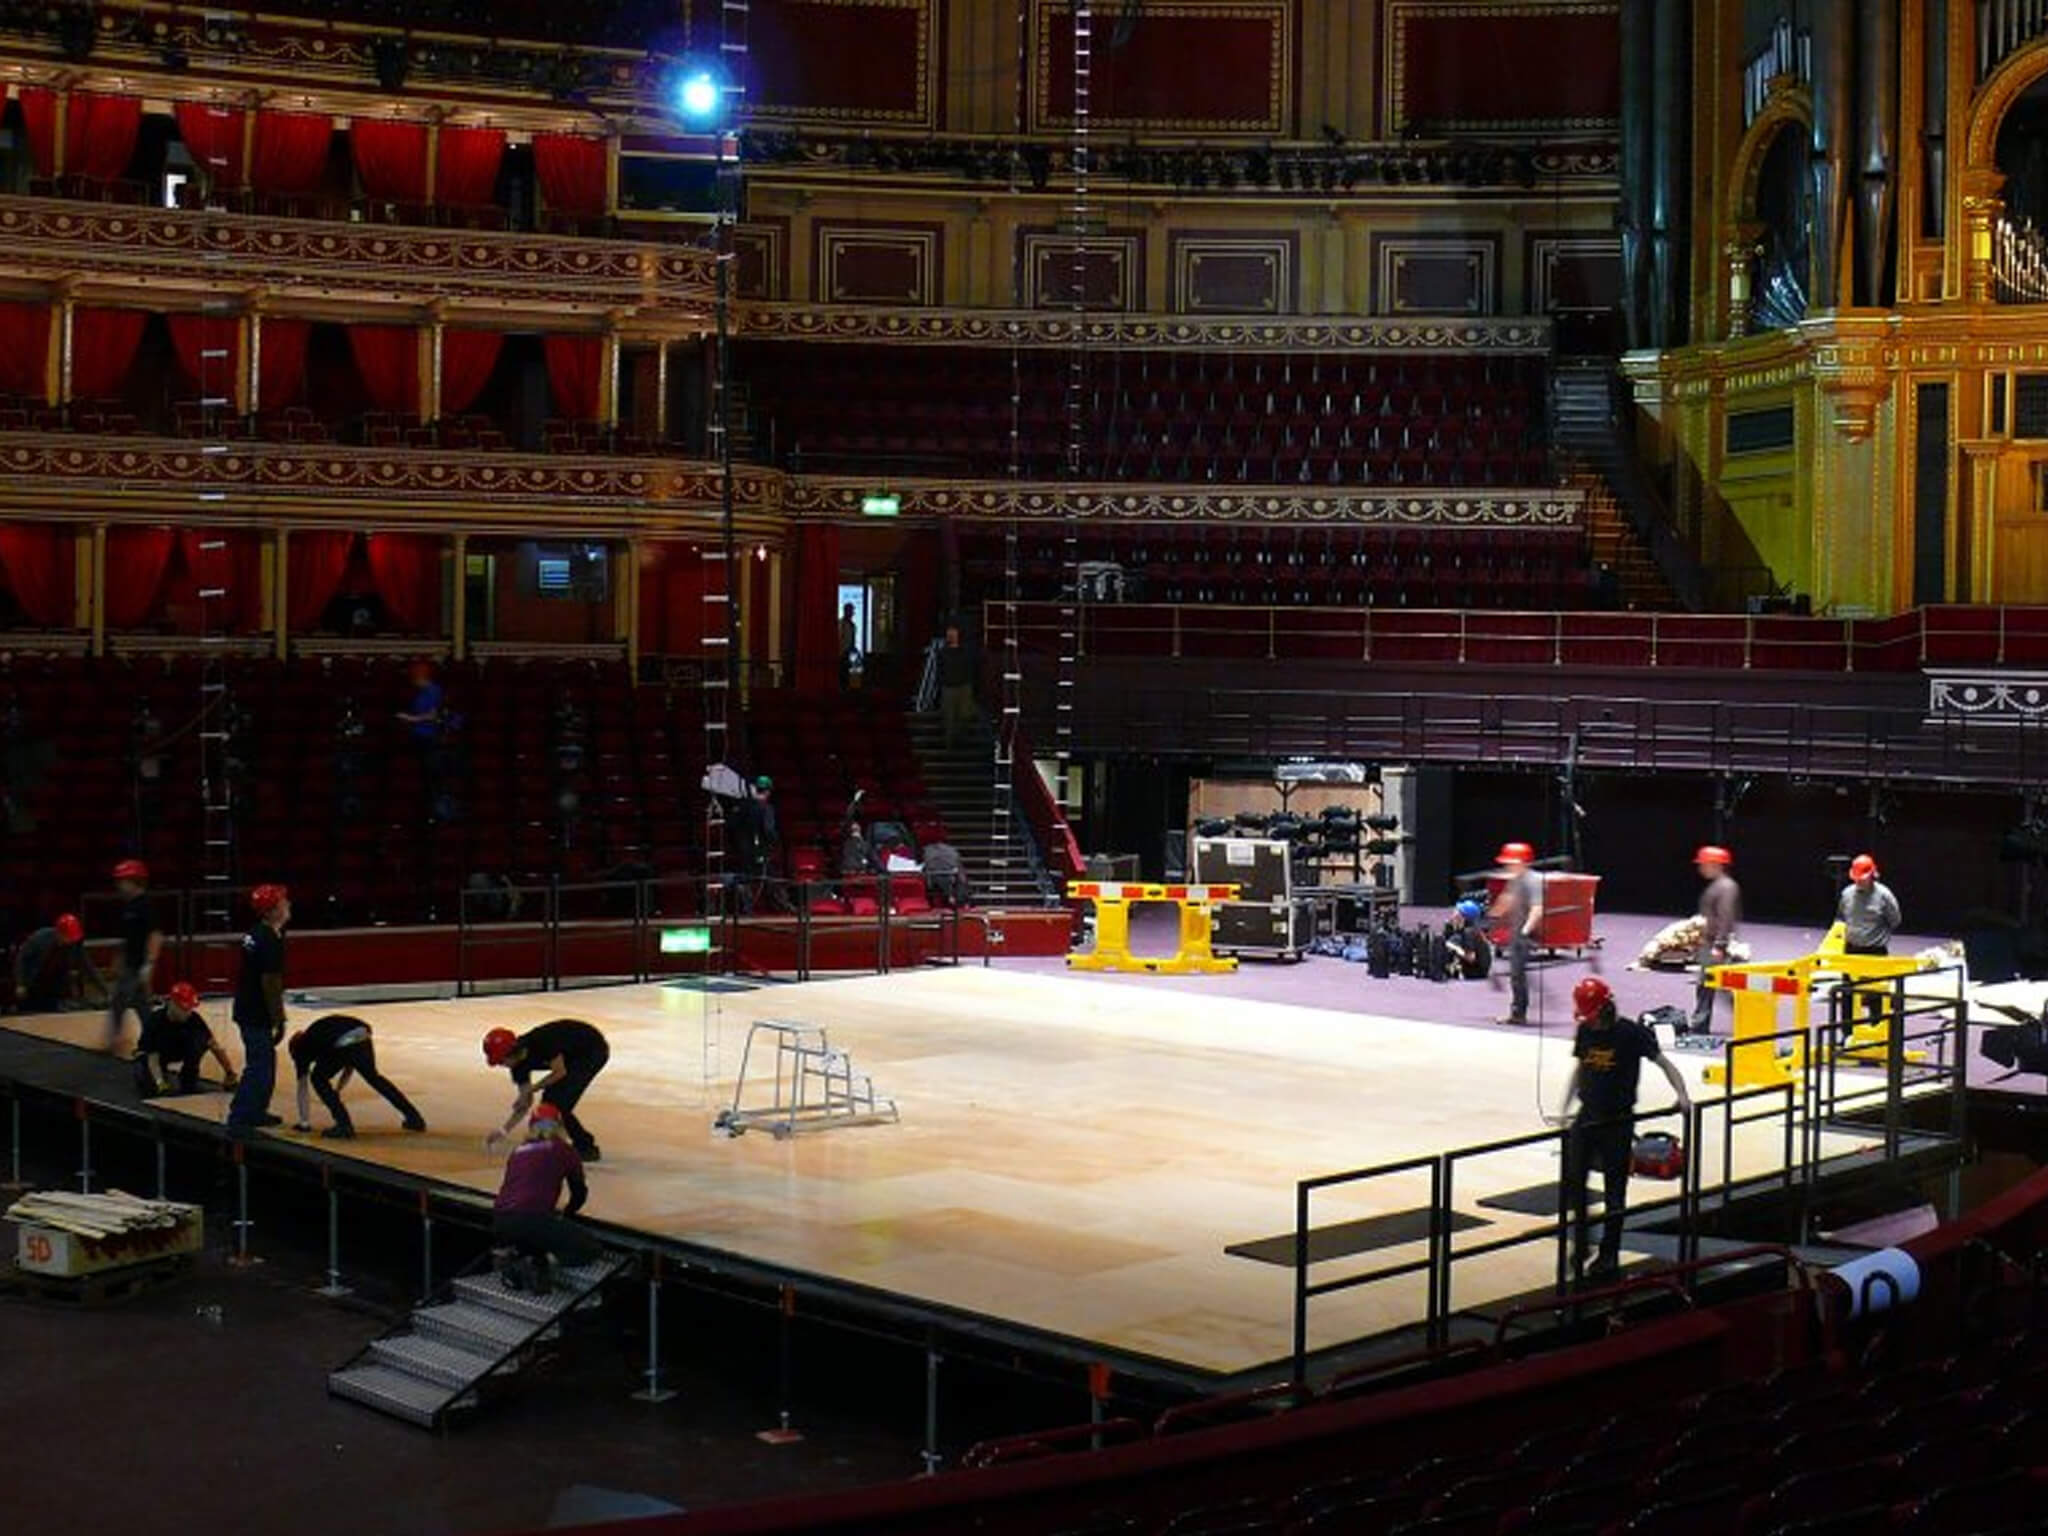 Harlequin stage at the Royal Albert Hall